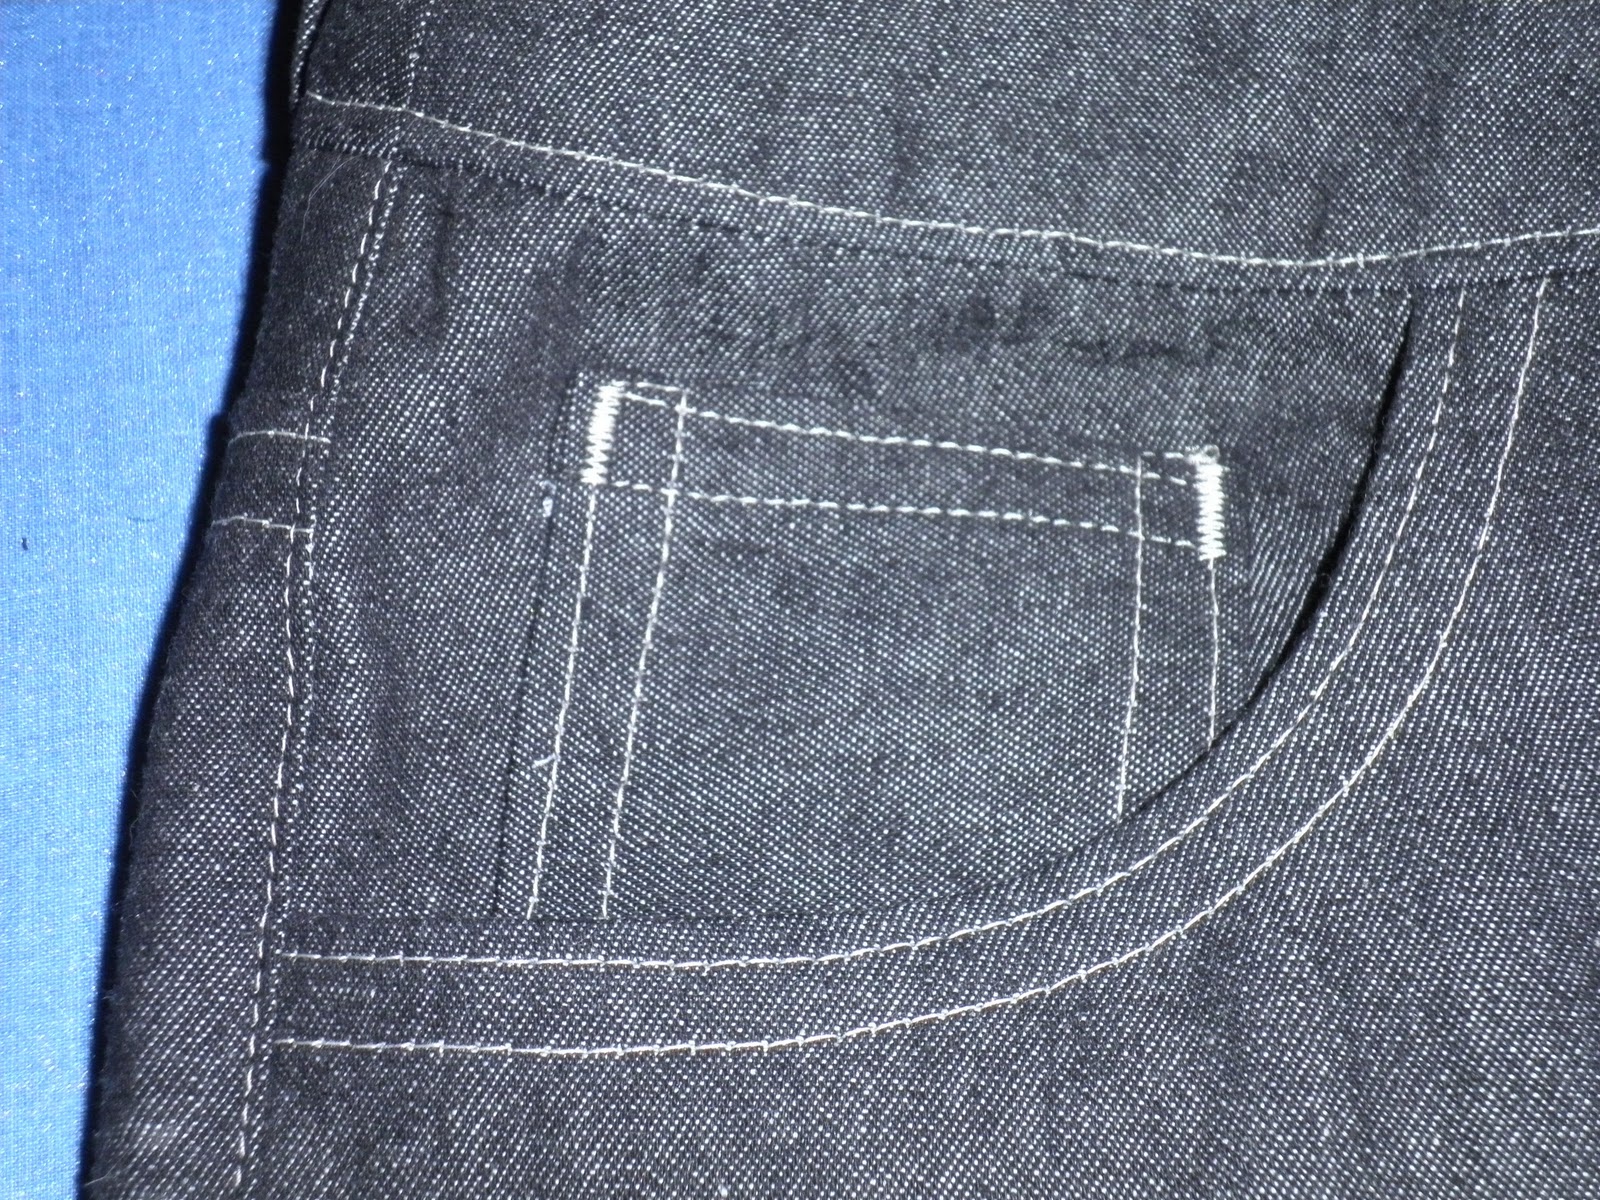 josieloves2sew: Jeans - I made jeans!